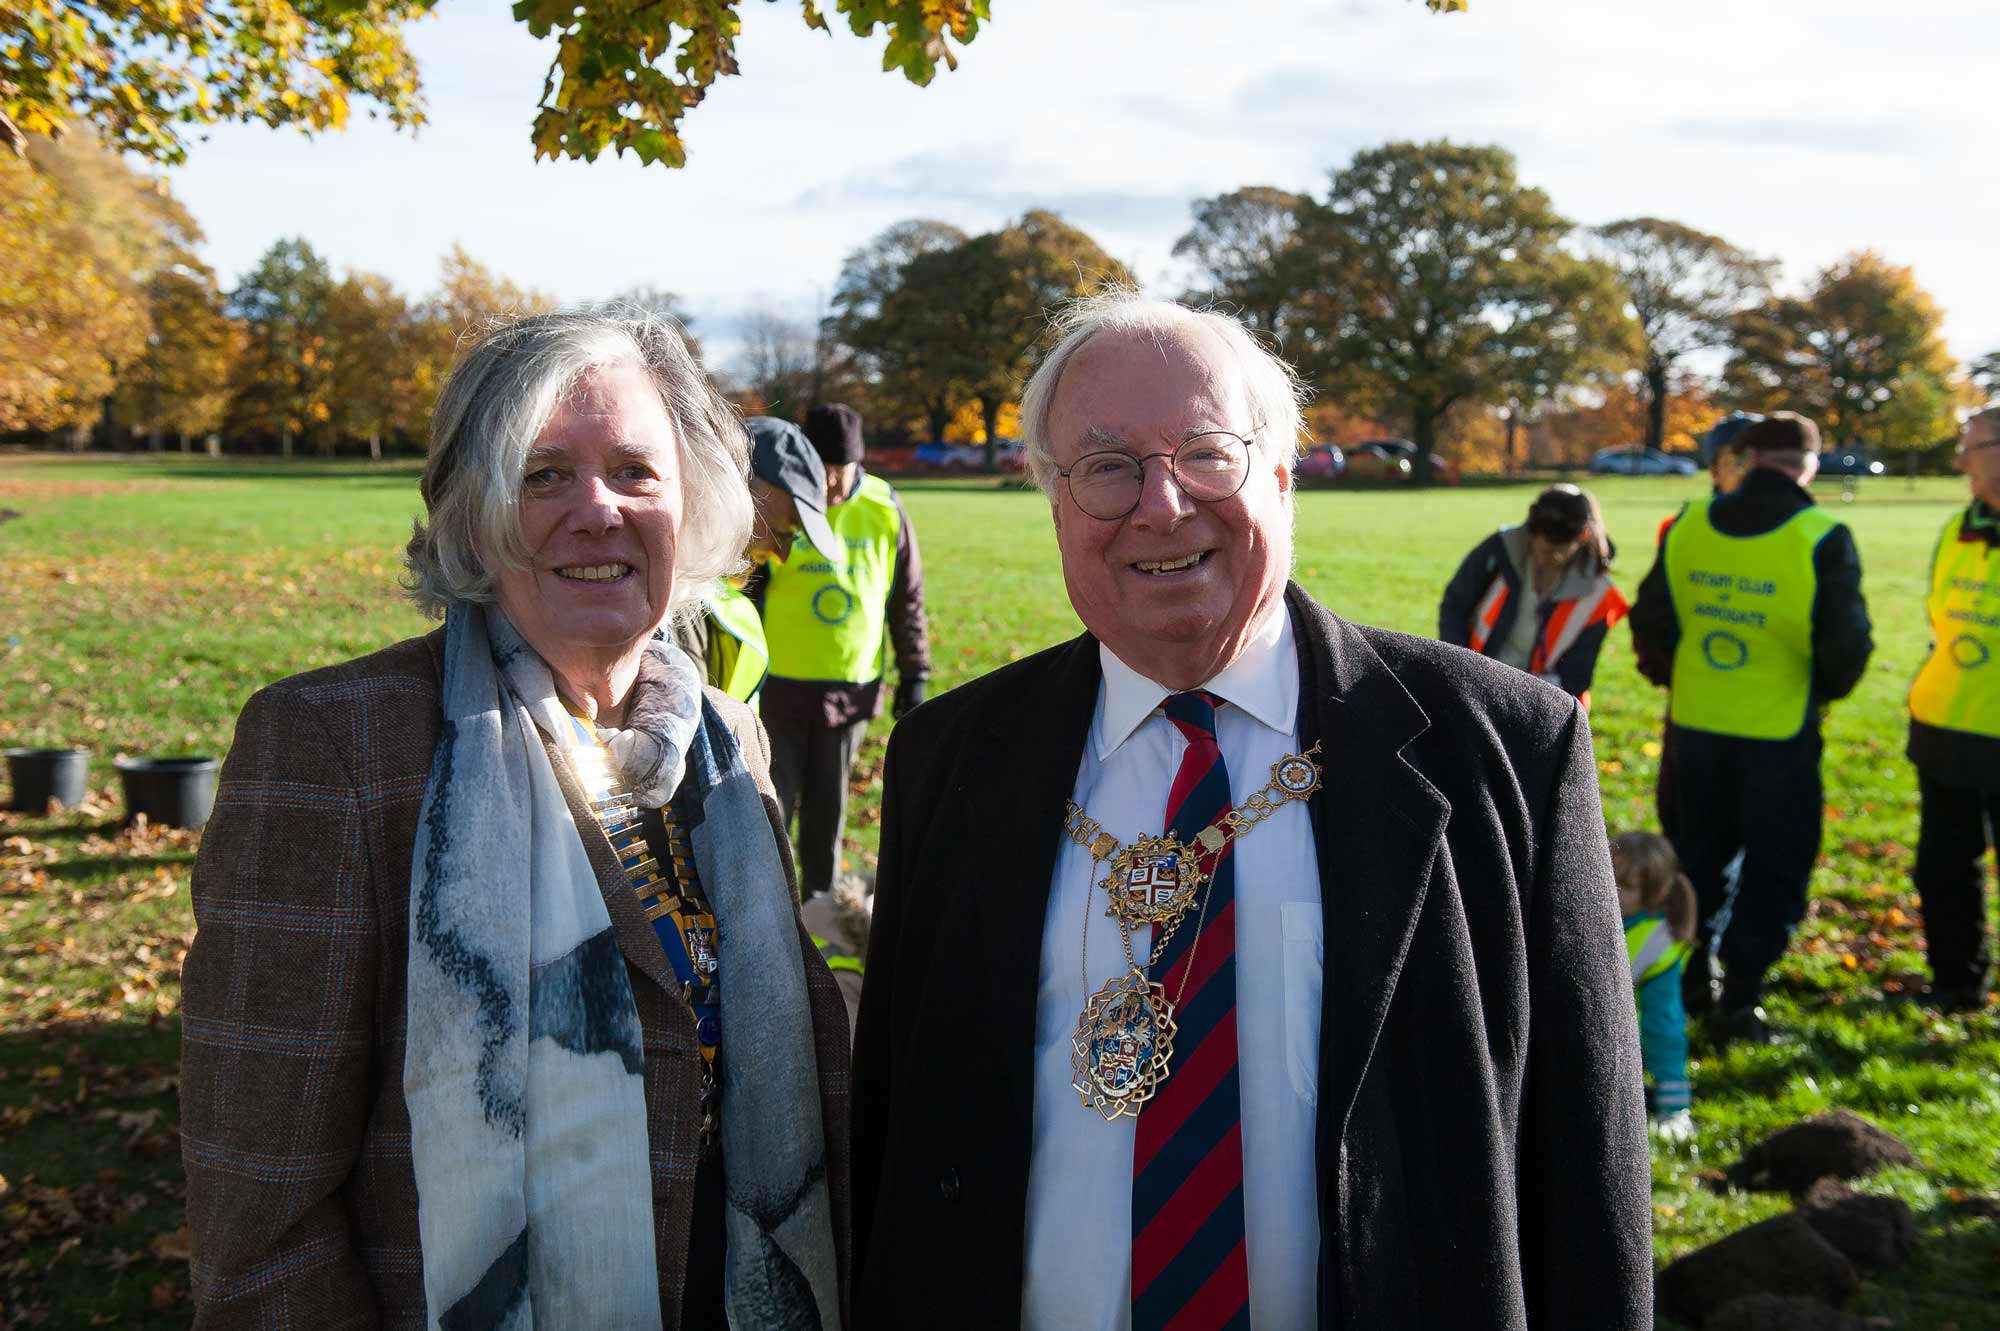 Harrogate Rotary Club President, Margaret-Ann De Courcey-Bayley with the Mayor of Harrogate, Nick Brown